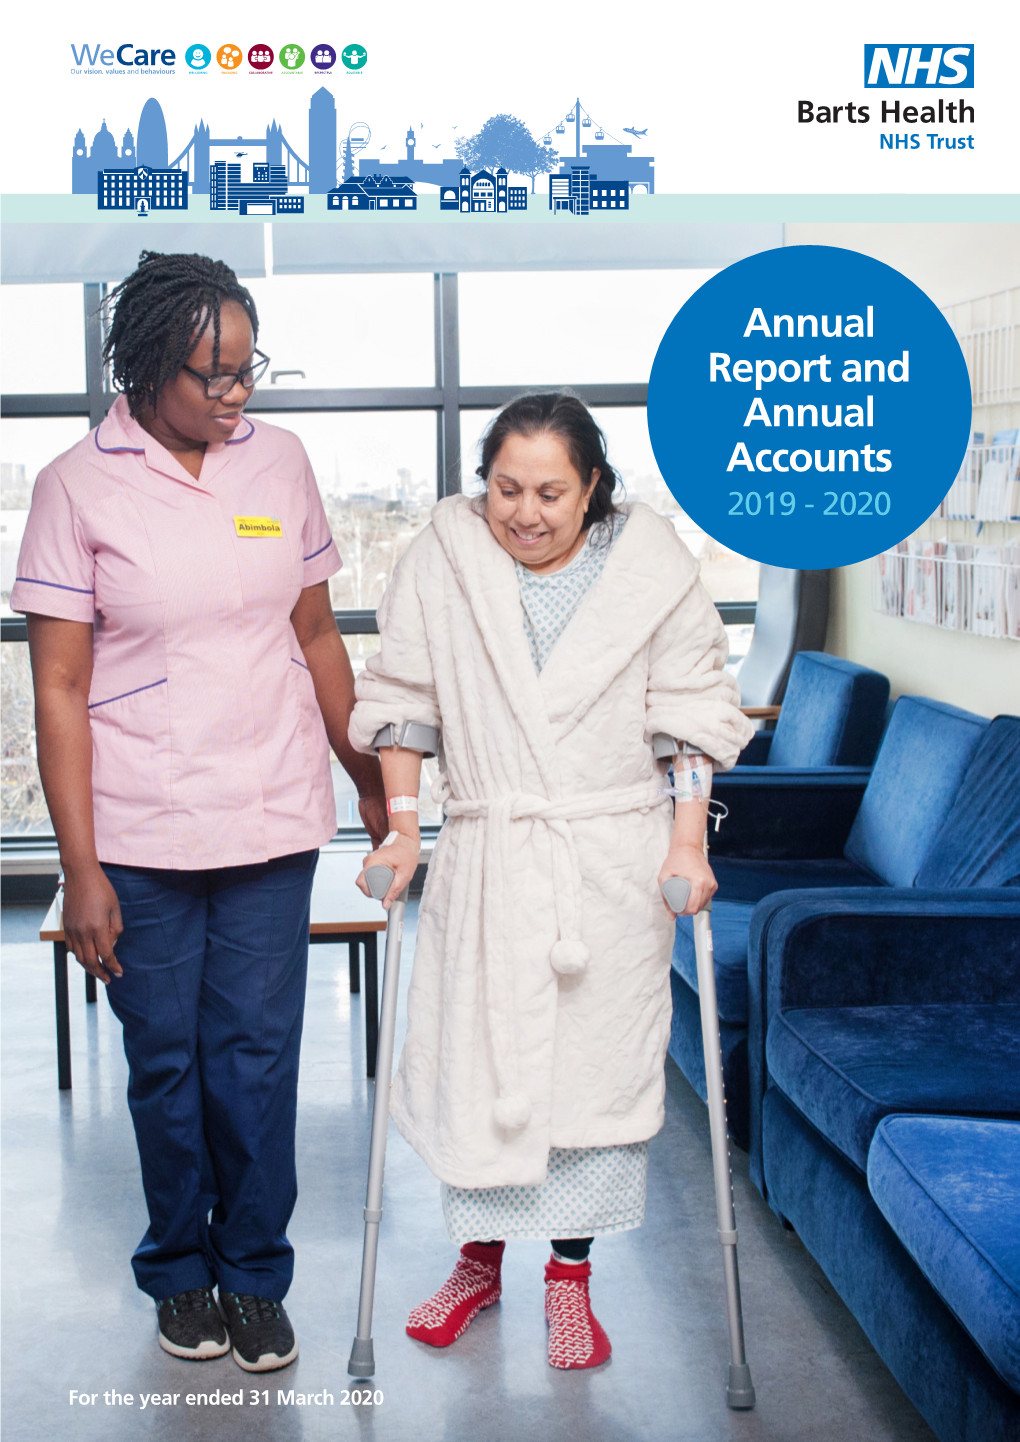 Barts Health NHS Trust: Annual Report and Accounts 2019/20